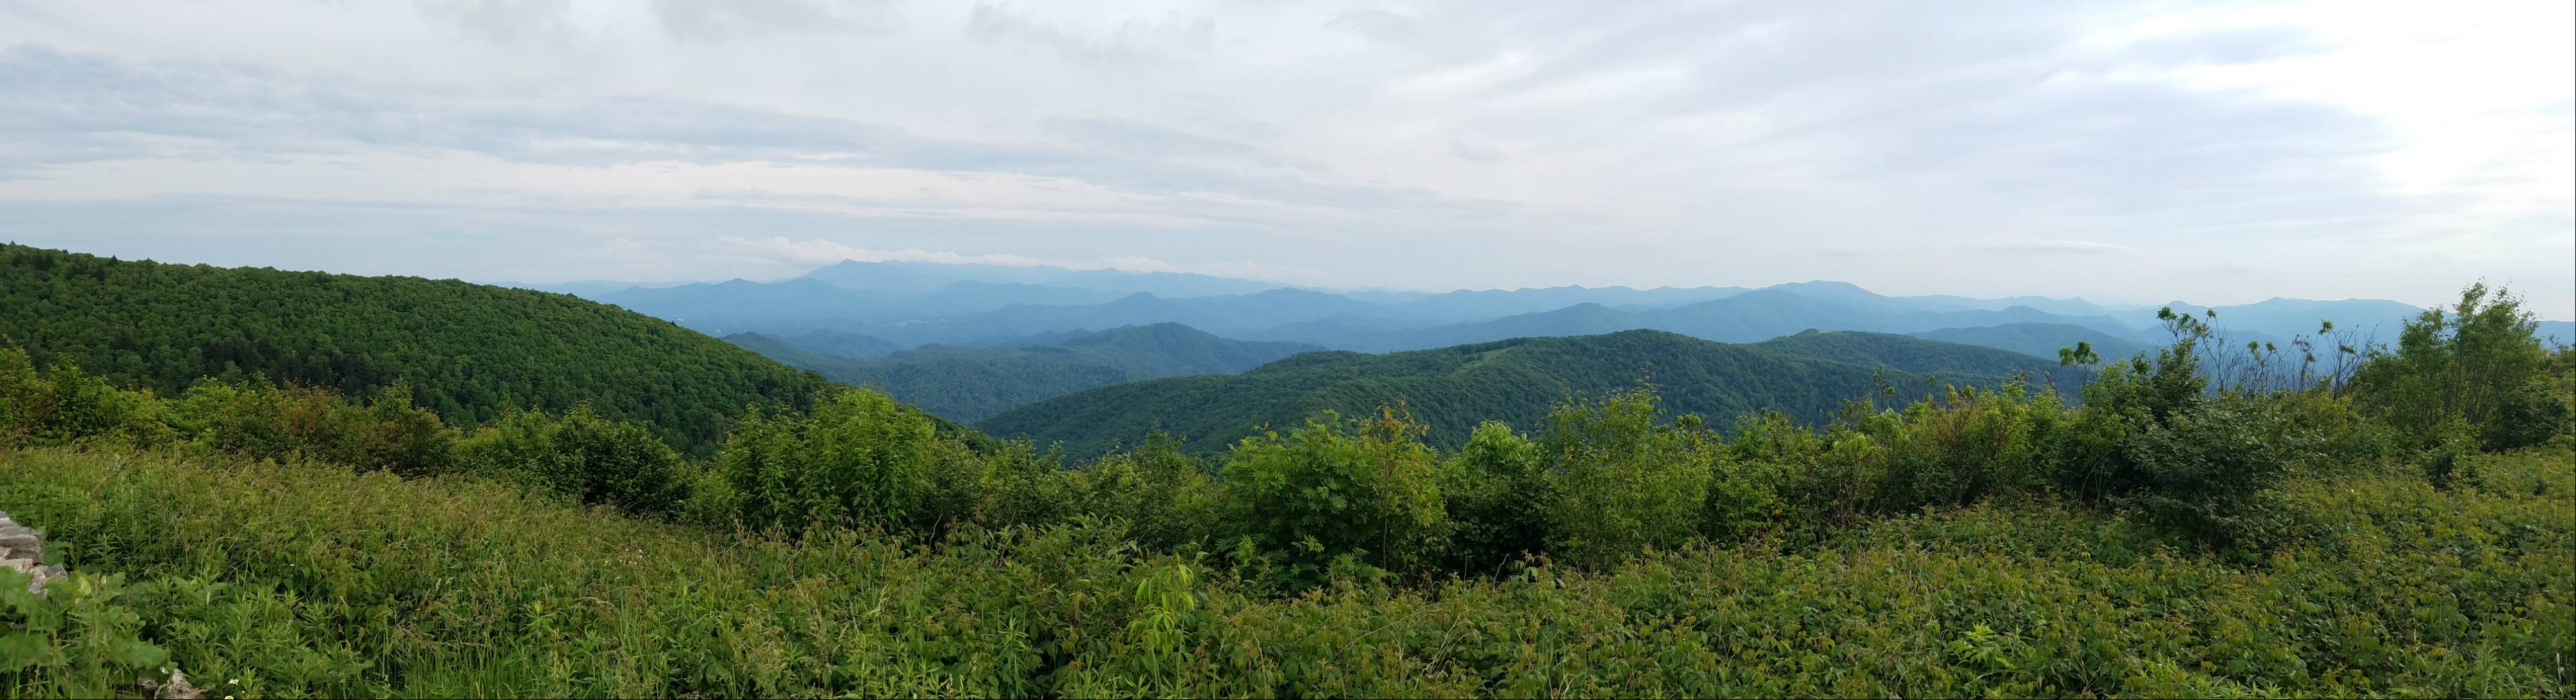 Picture of skyline of mountains at Beauty Spot on hiking trail in Tennessee.